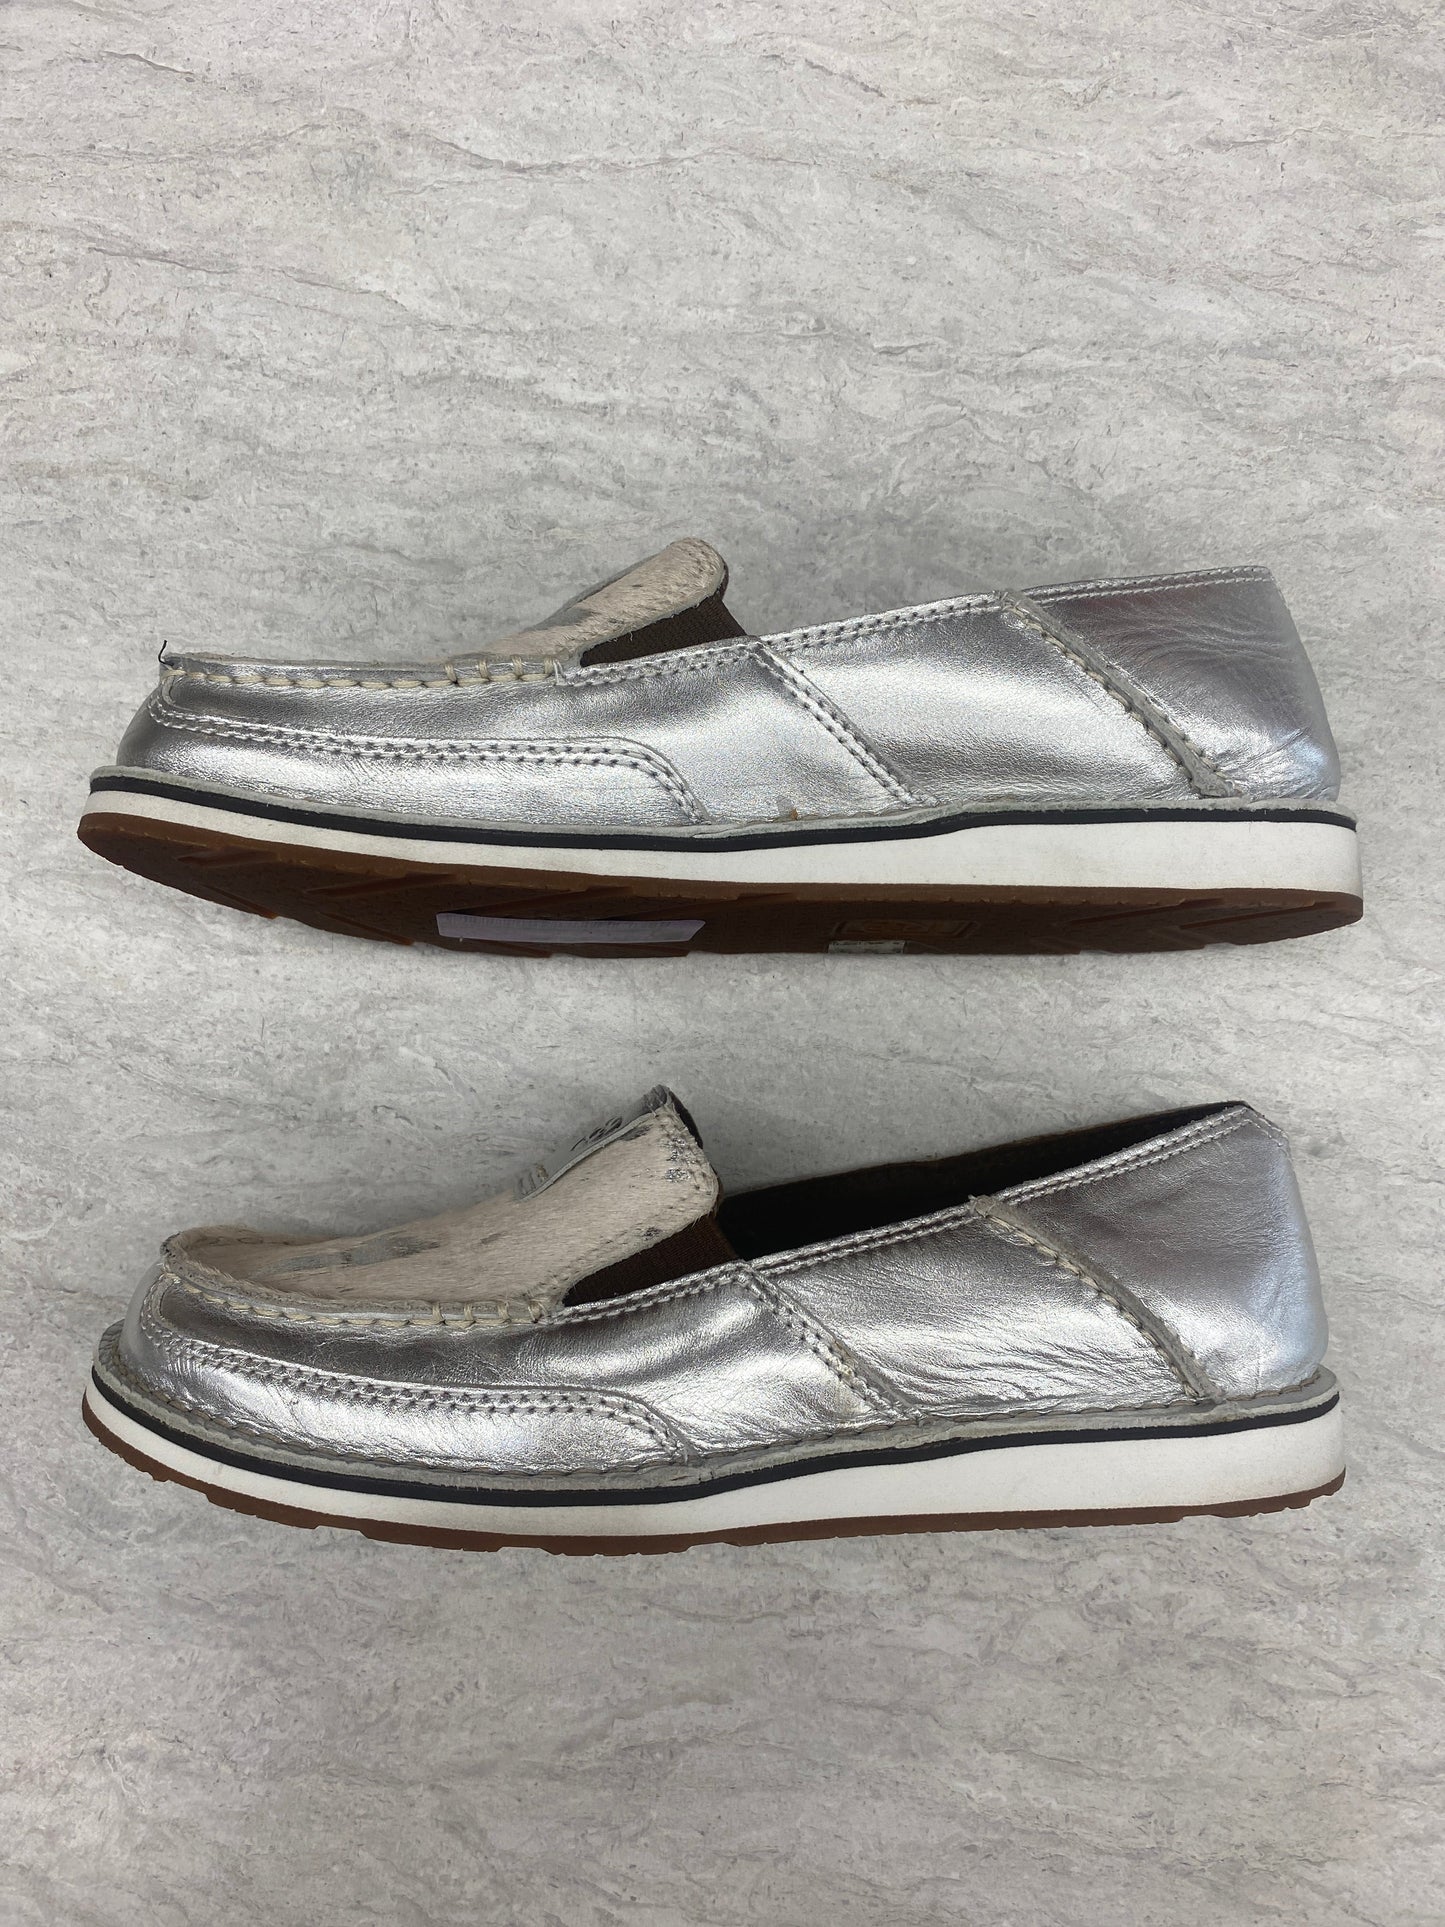 Silver & Tan Shoes Flats Ariat, Size 9